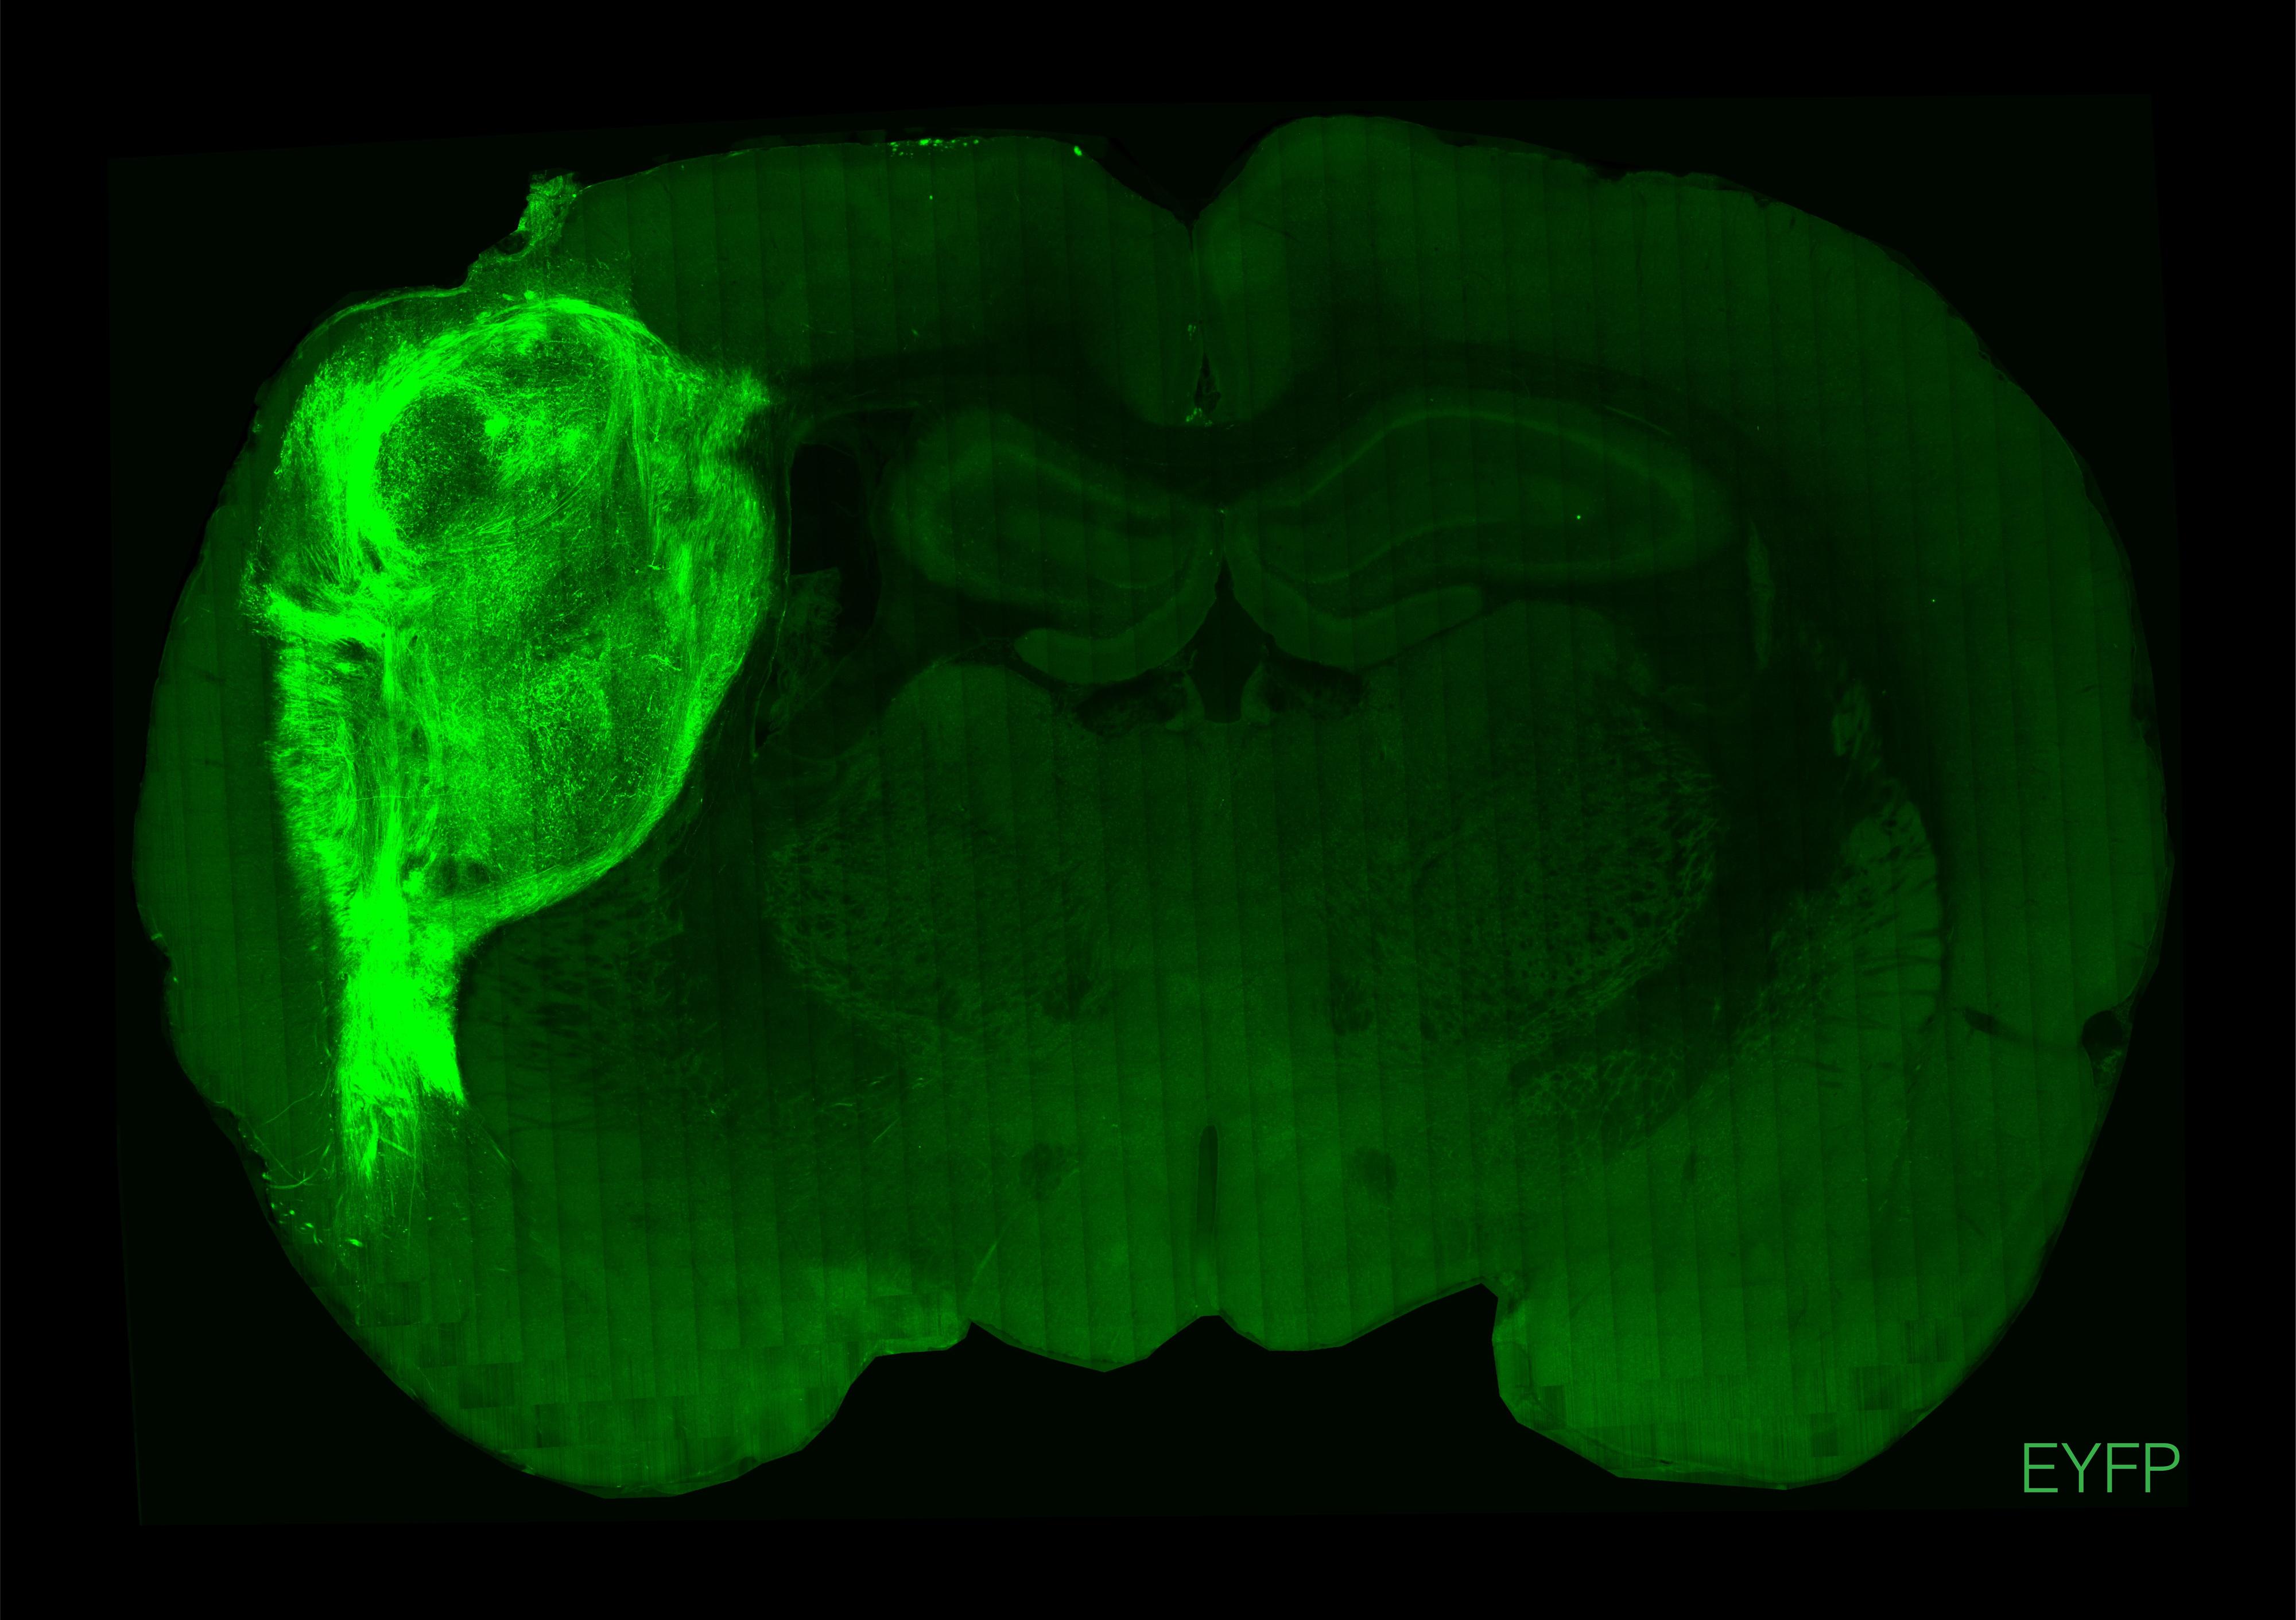 This image shows a cross section of a rat brain taken from one of the experimental rats  The whole brain is green but the 